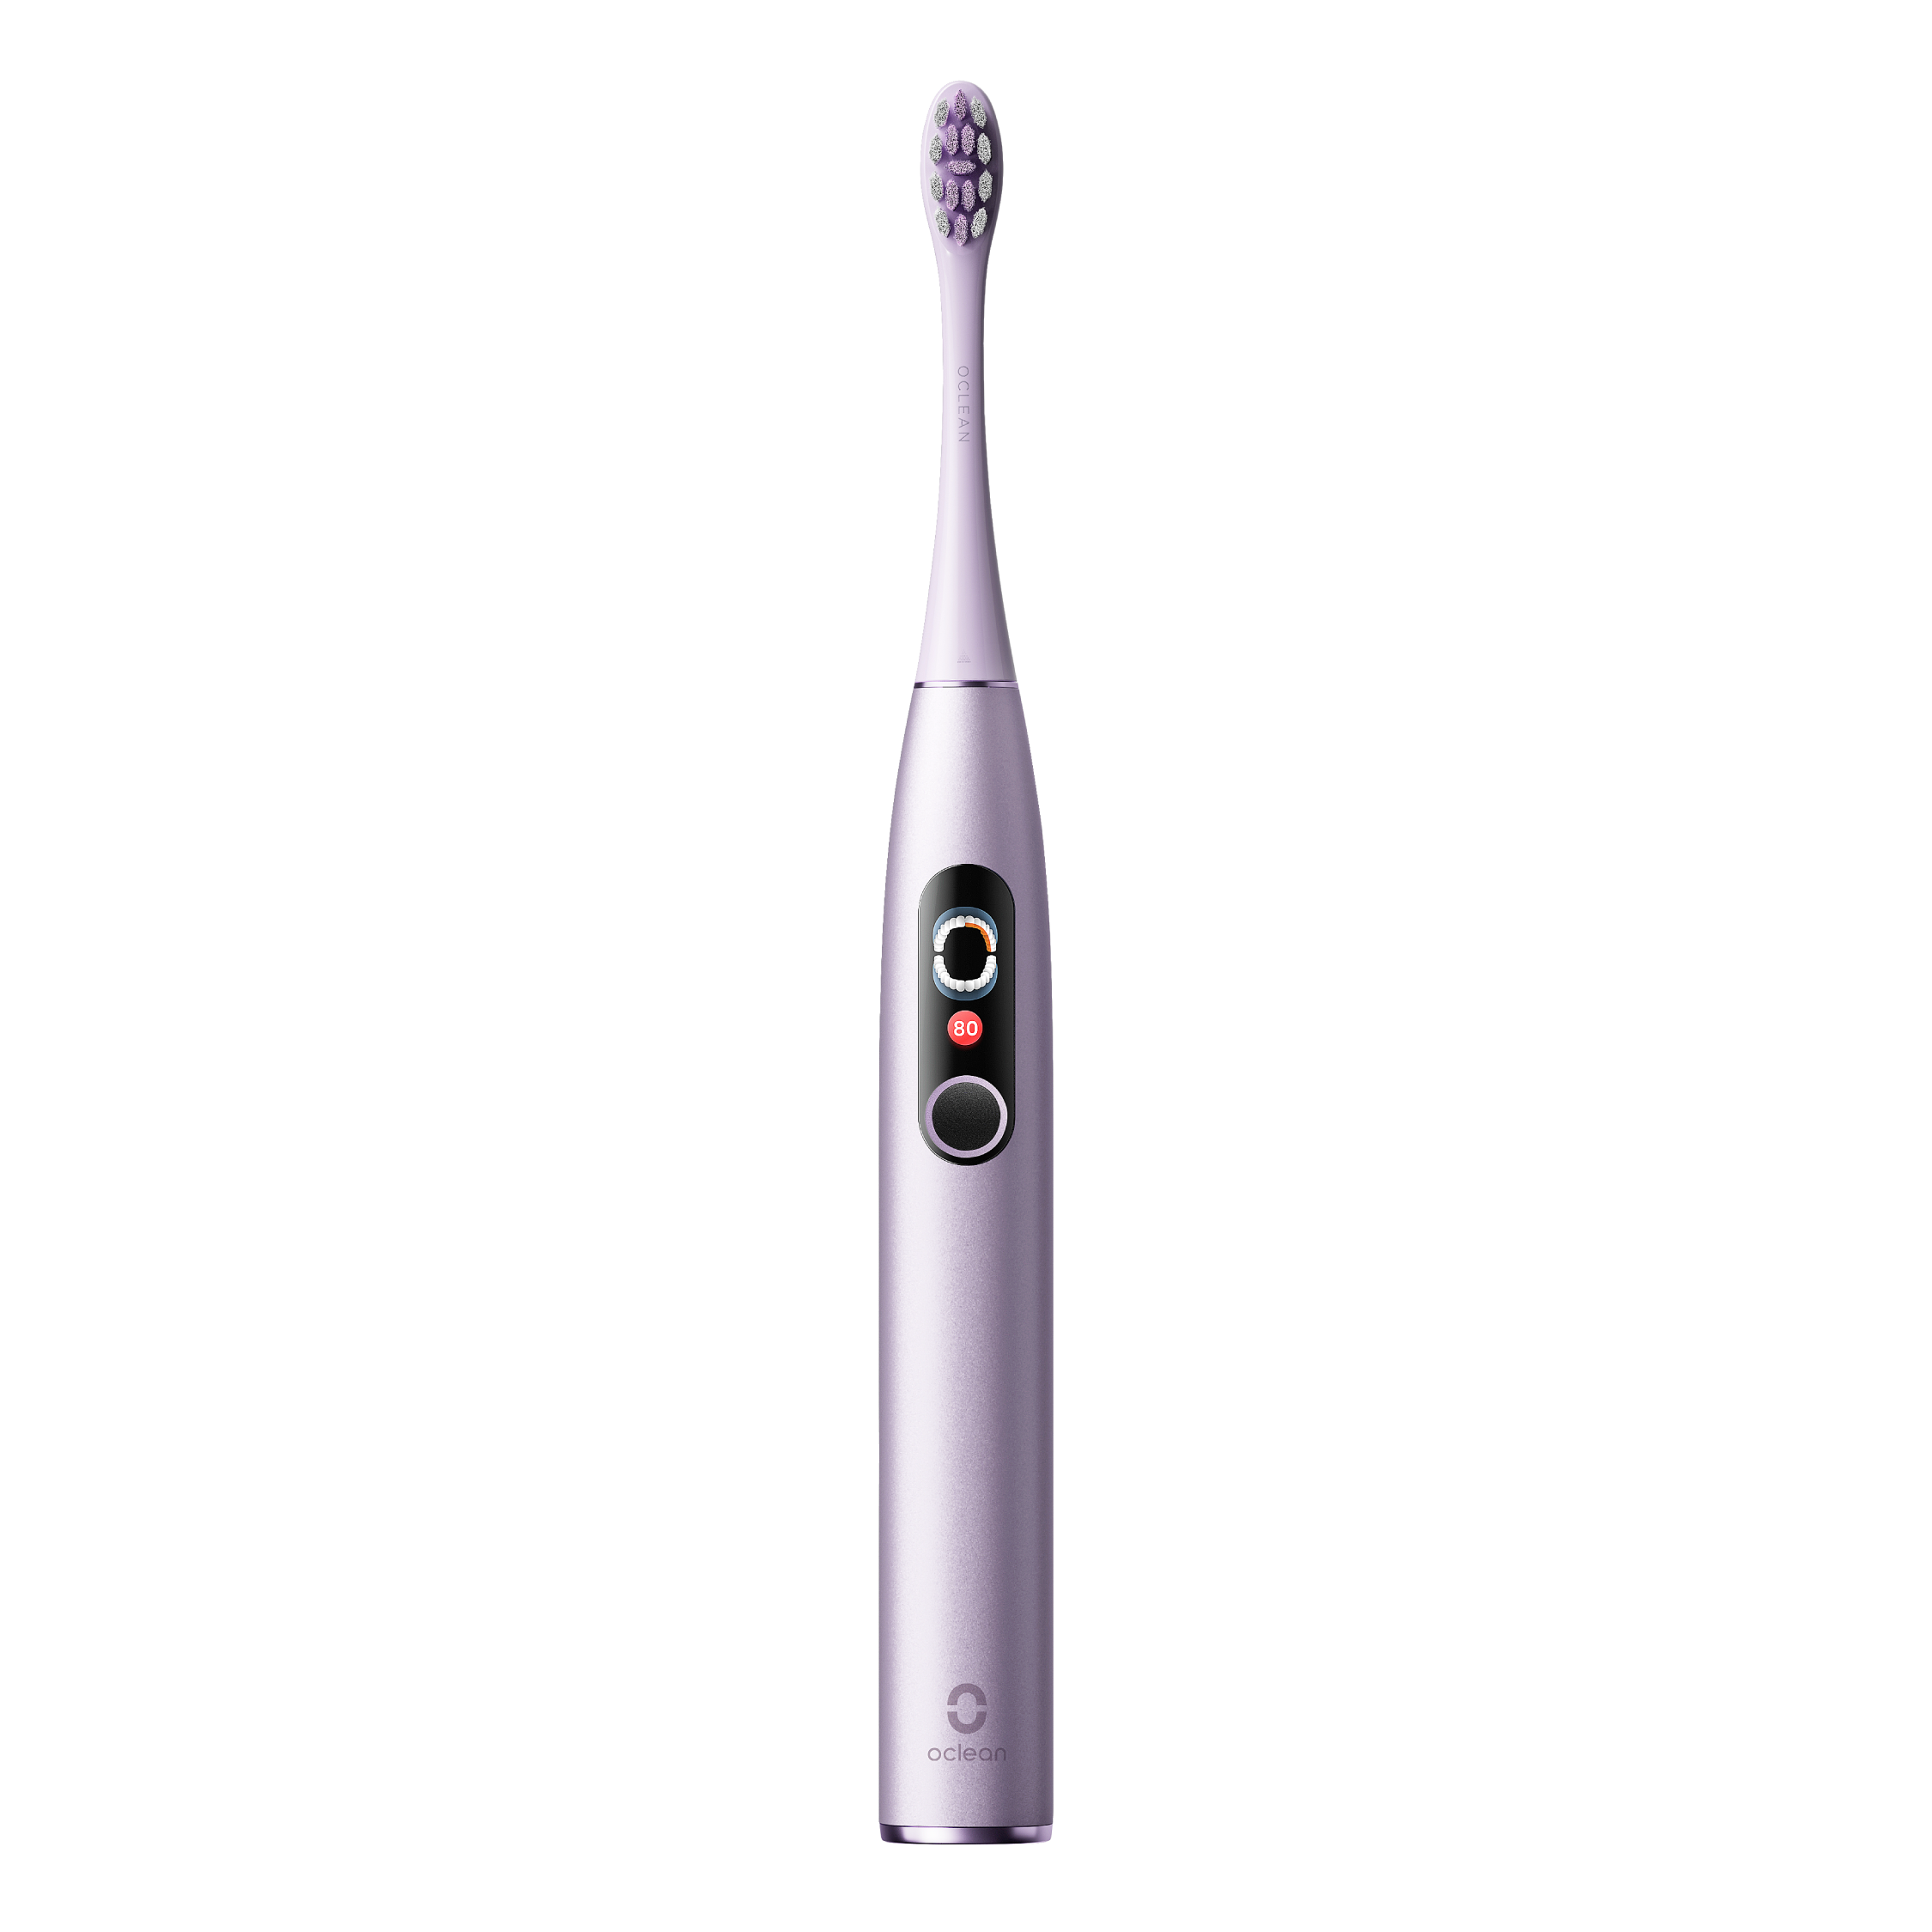 Oclean X Pro Digital Sonic Electric Toothbrush-Toothbrushes-Oclean US Store